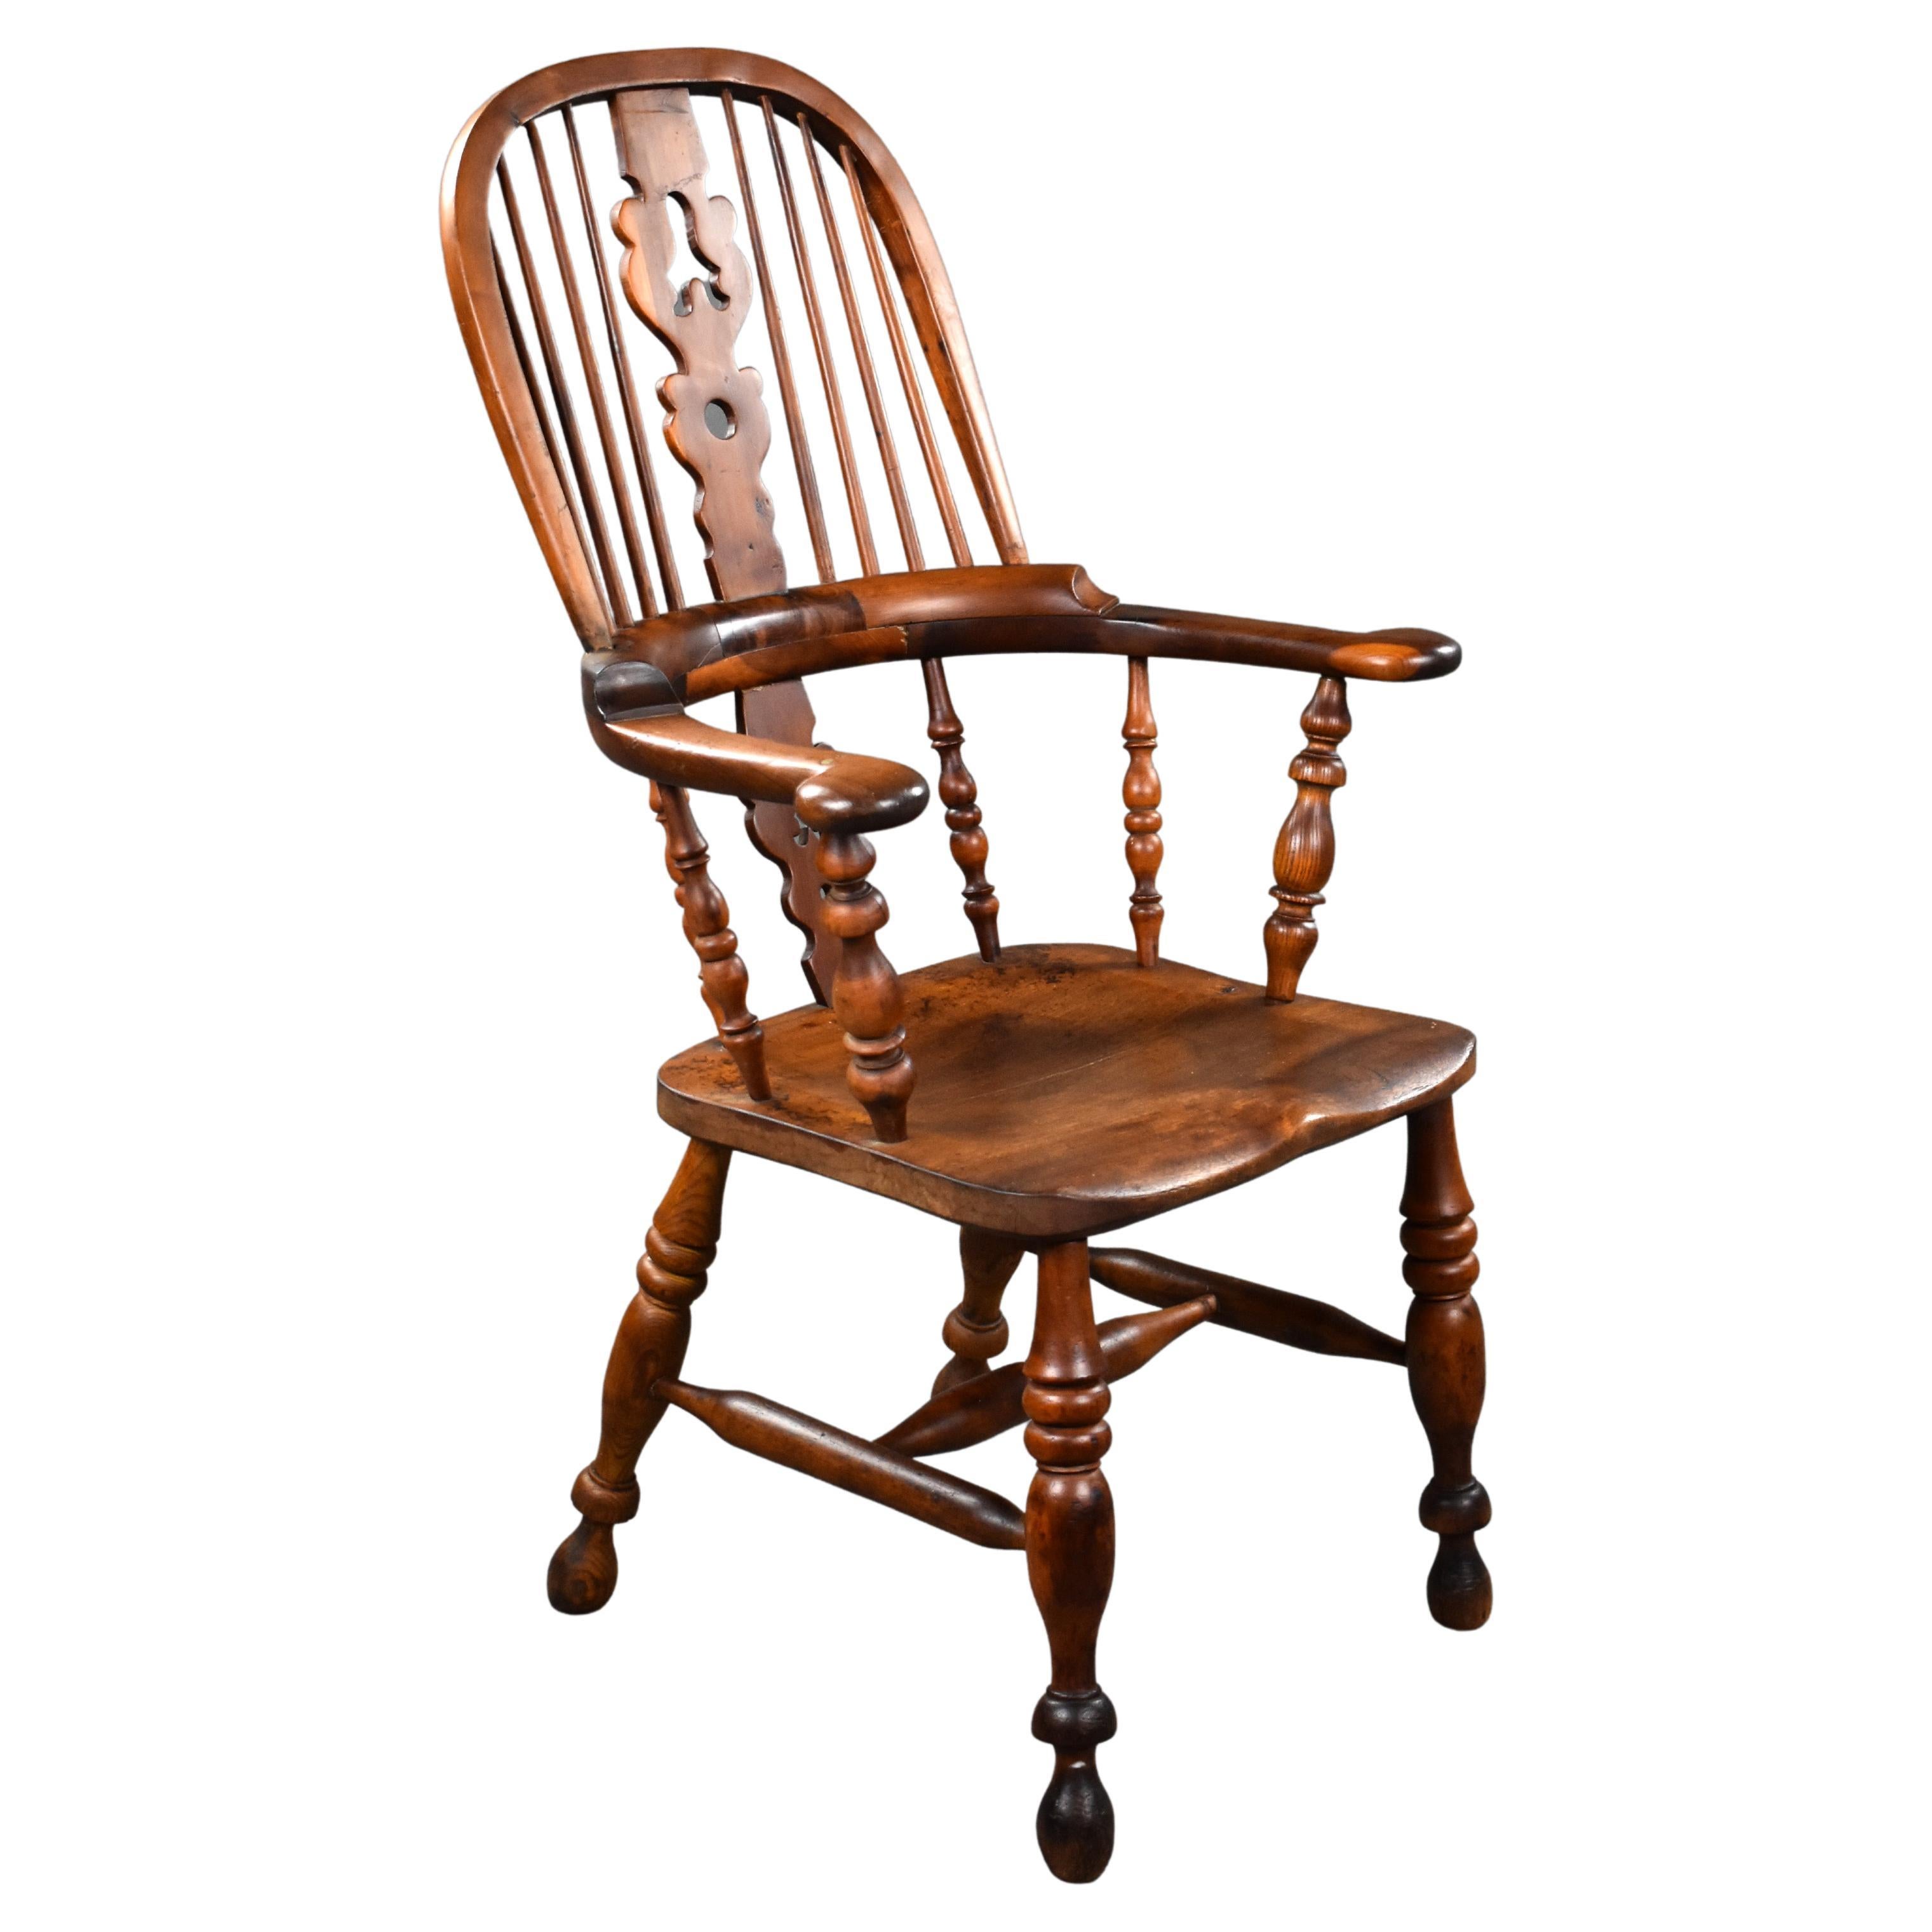 19th Century English Yew Wood High Back Broad Arm Windsor Chair For Sale